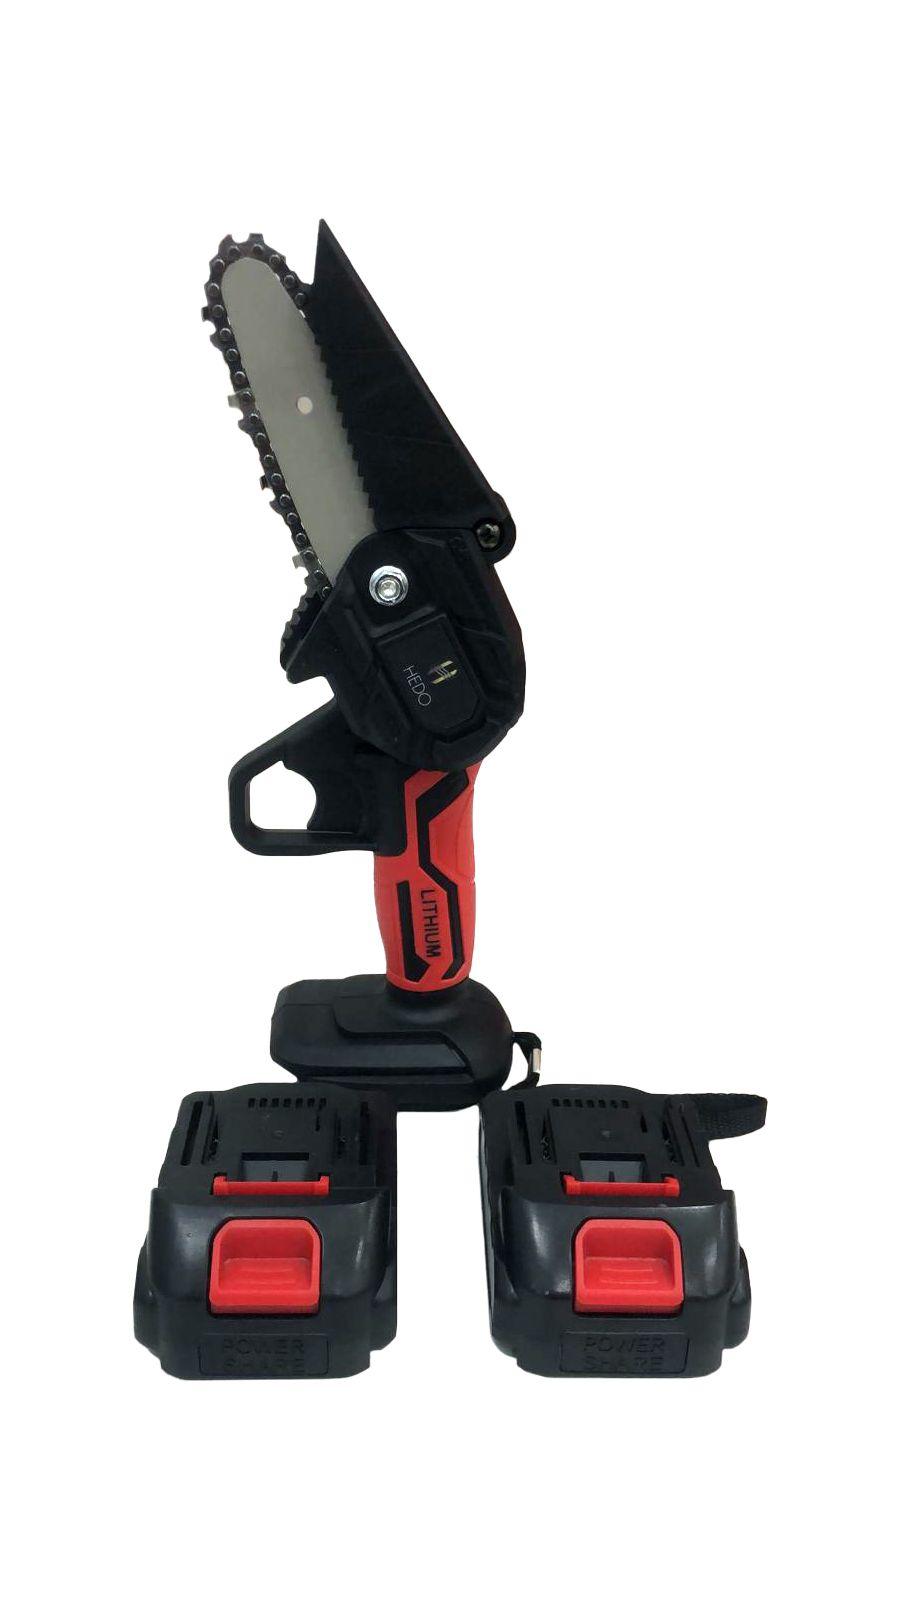 Mini cordless chainsaw - red